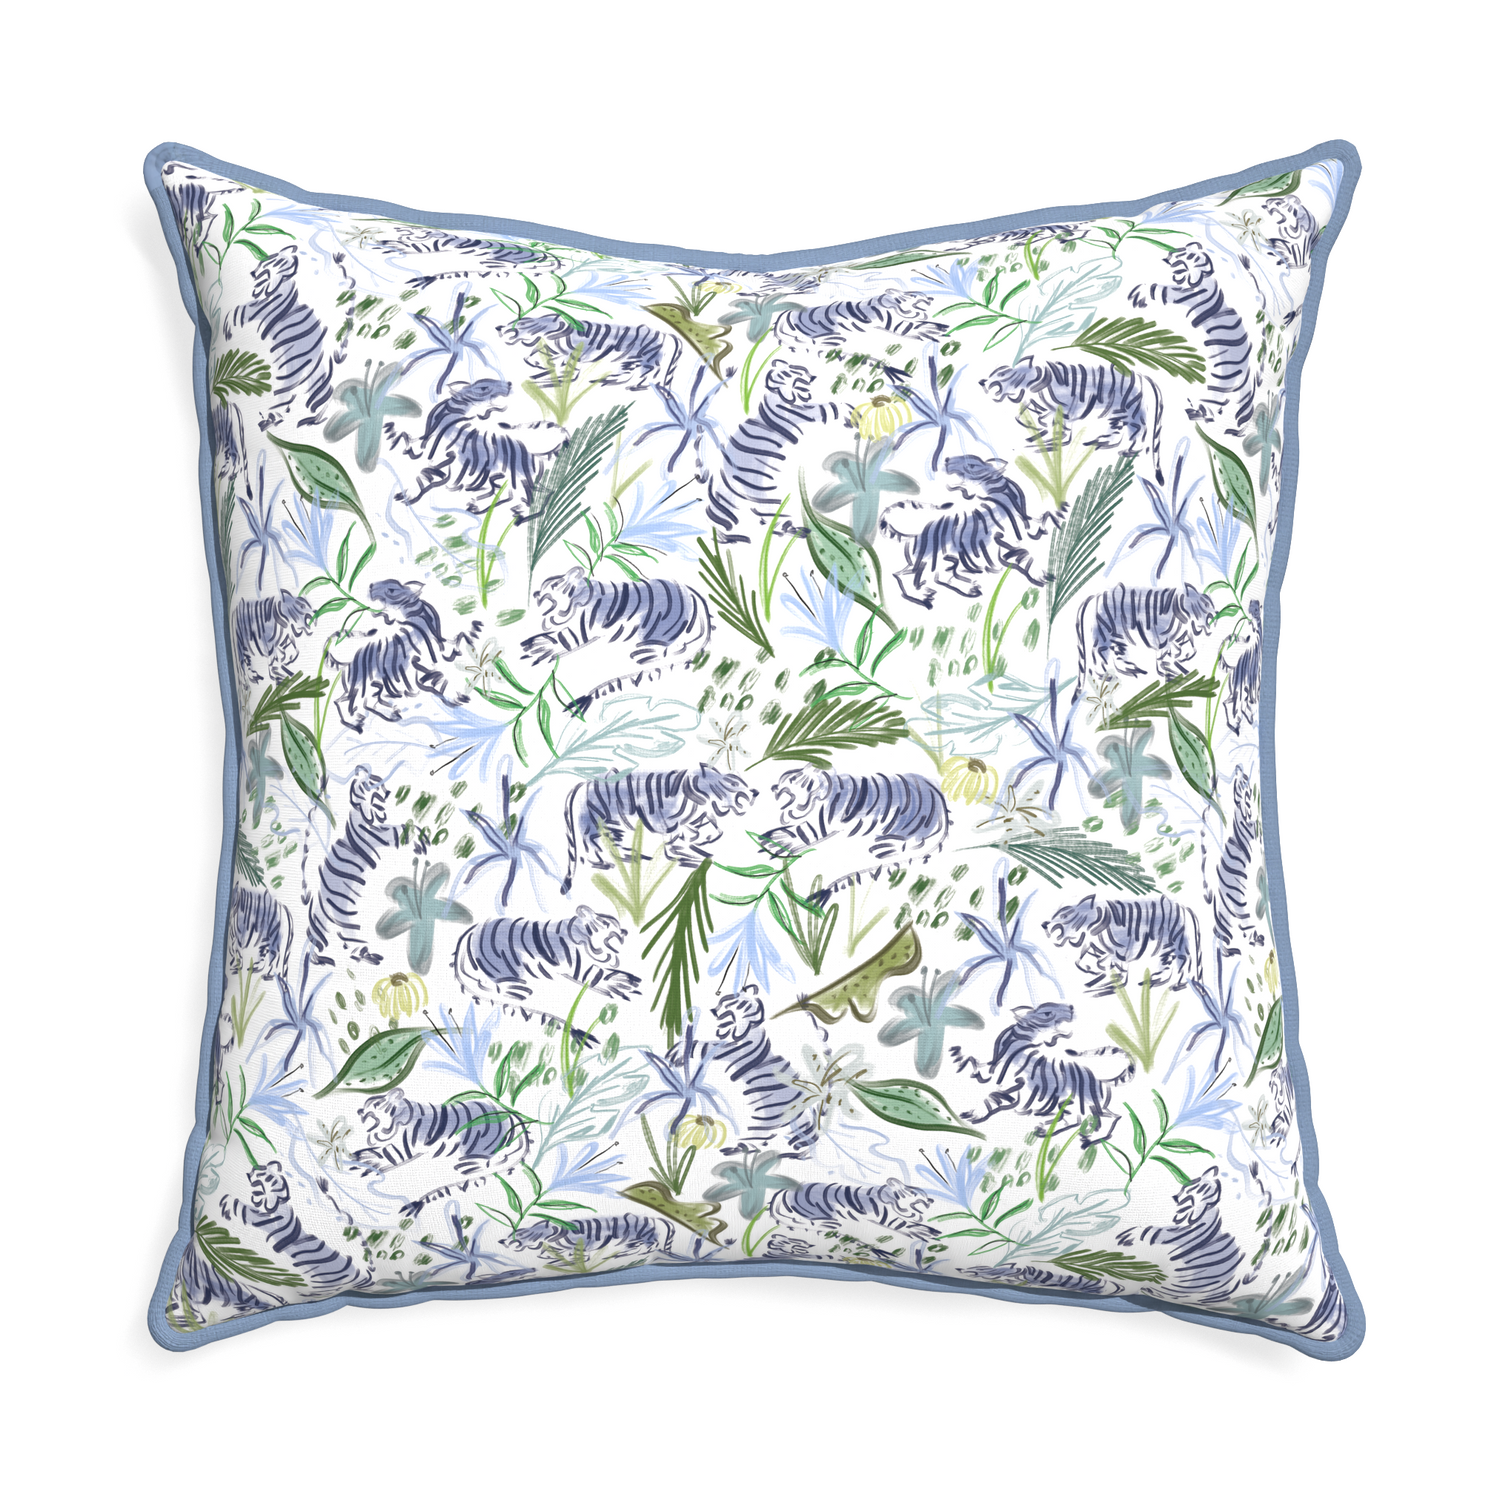 Euro-sham frida green custom pillow with sky piping on white background